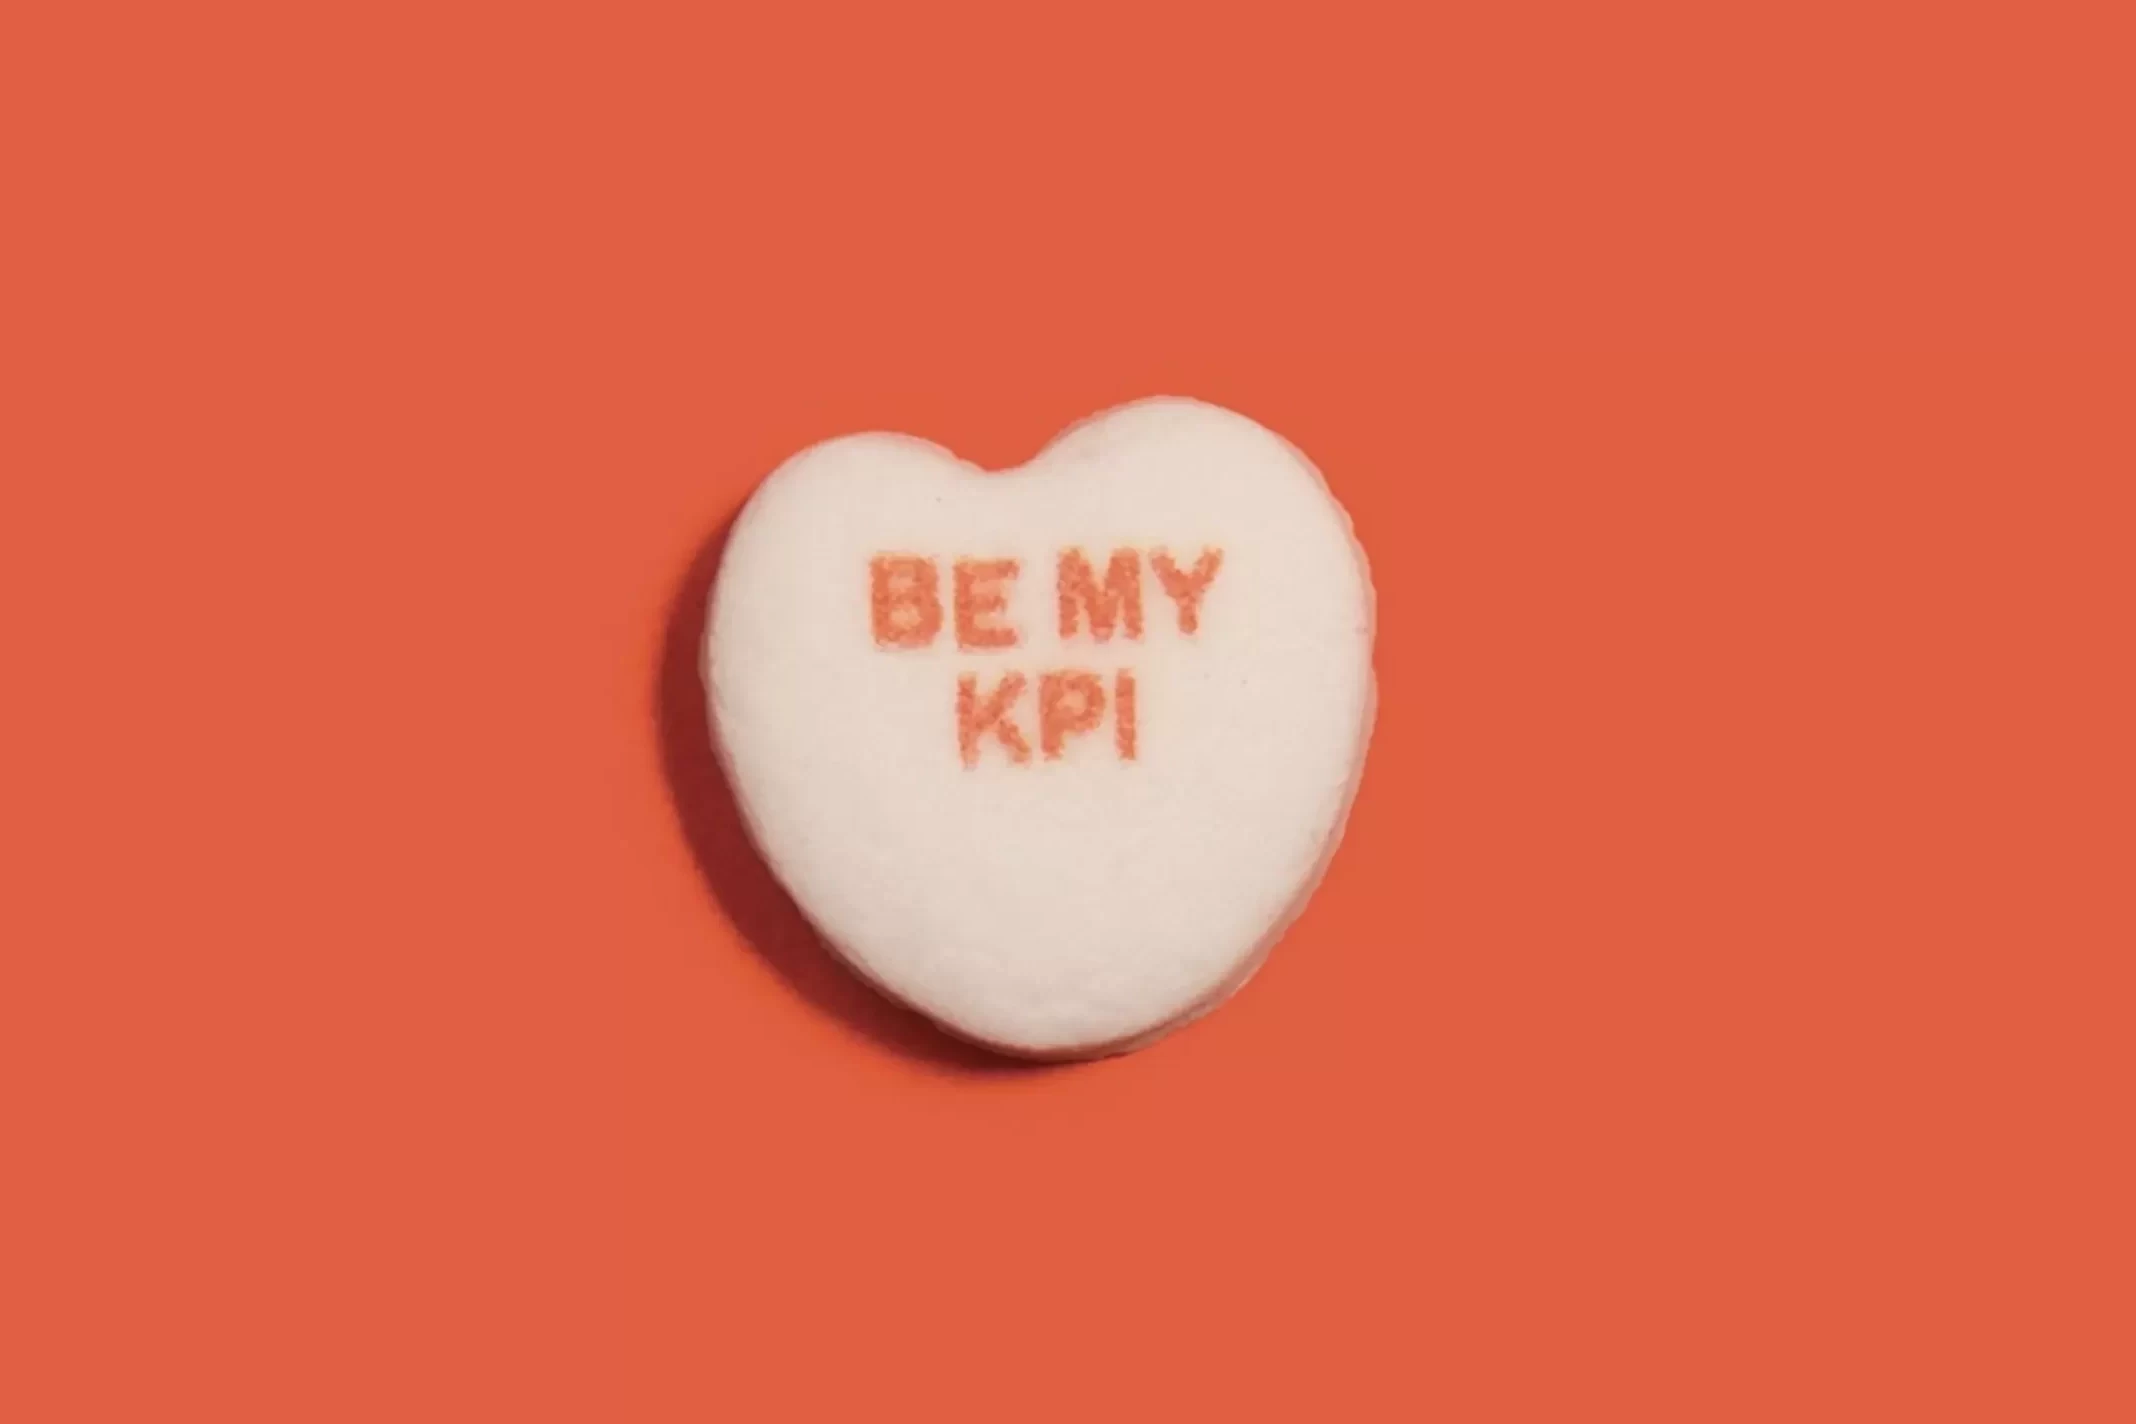 kpi banner and heart candy